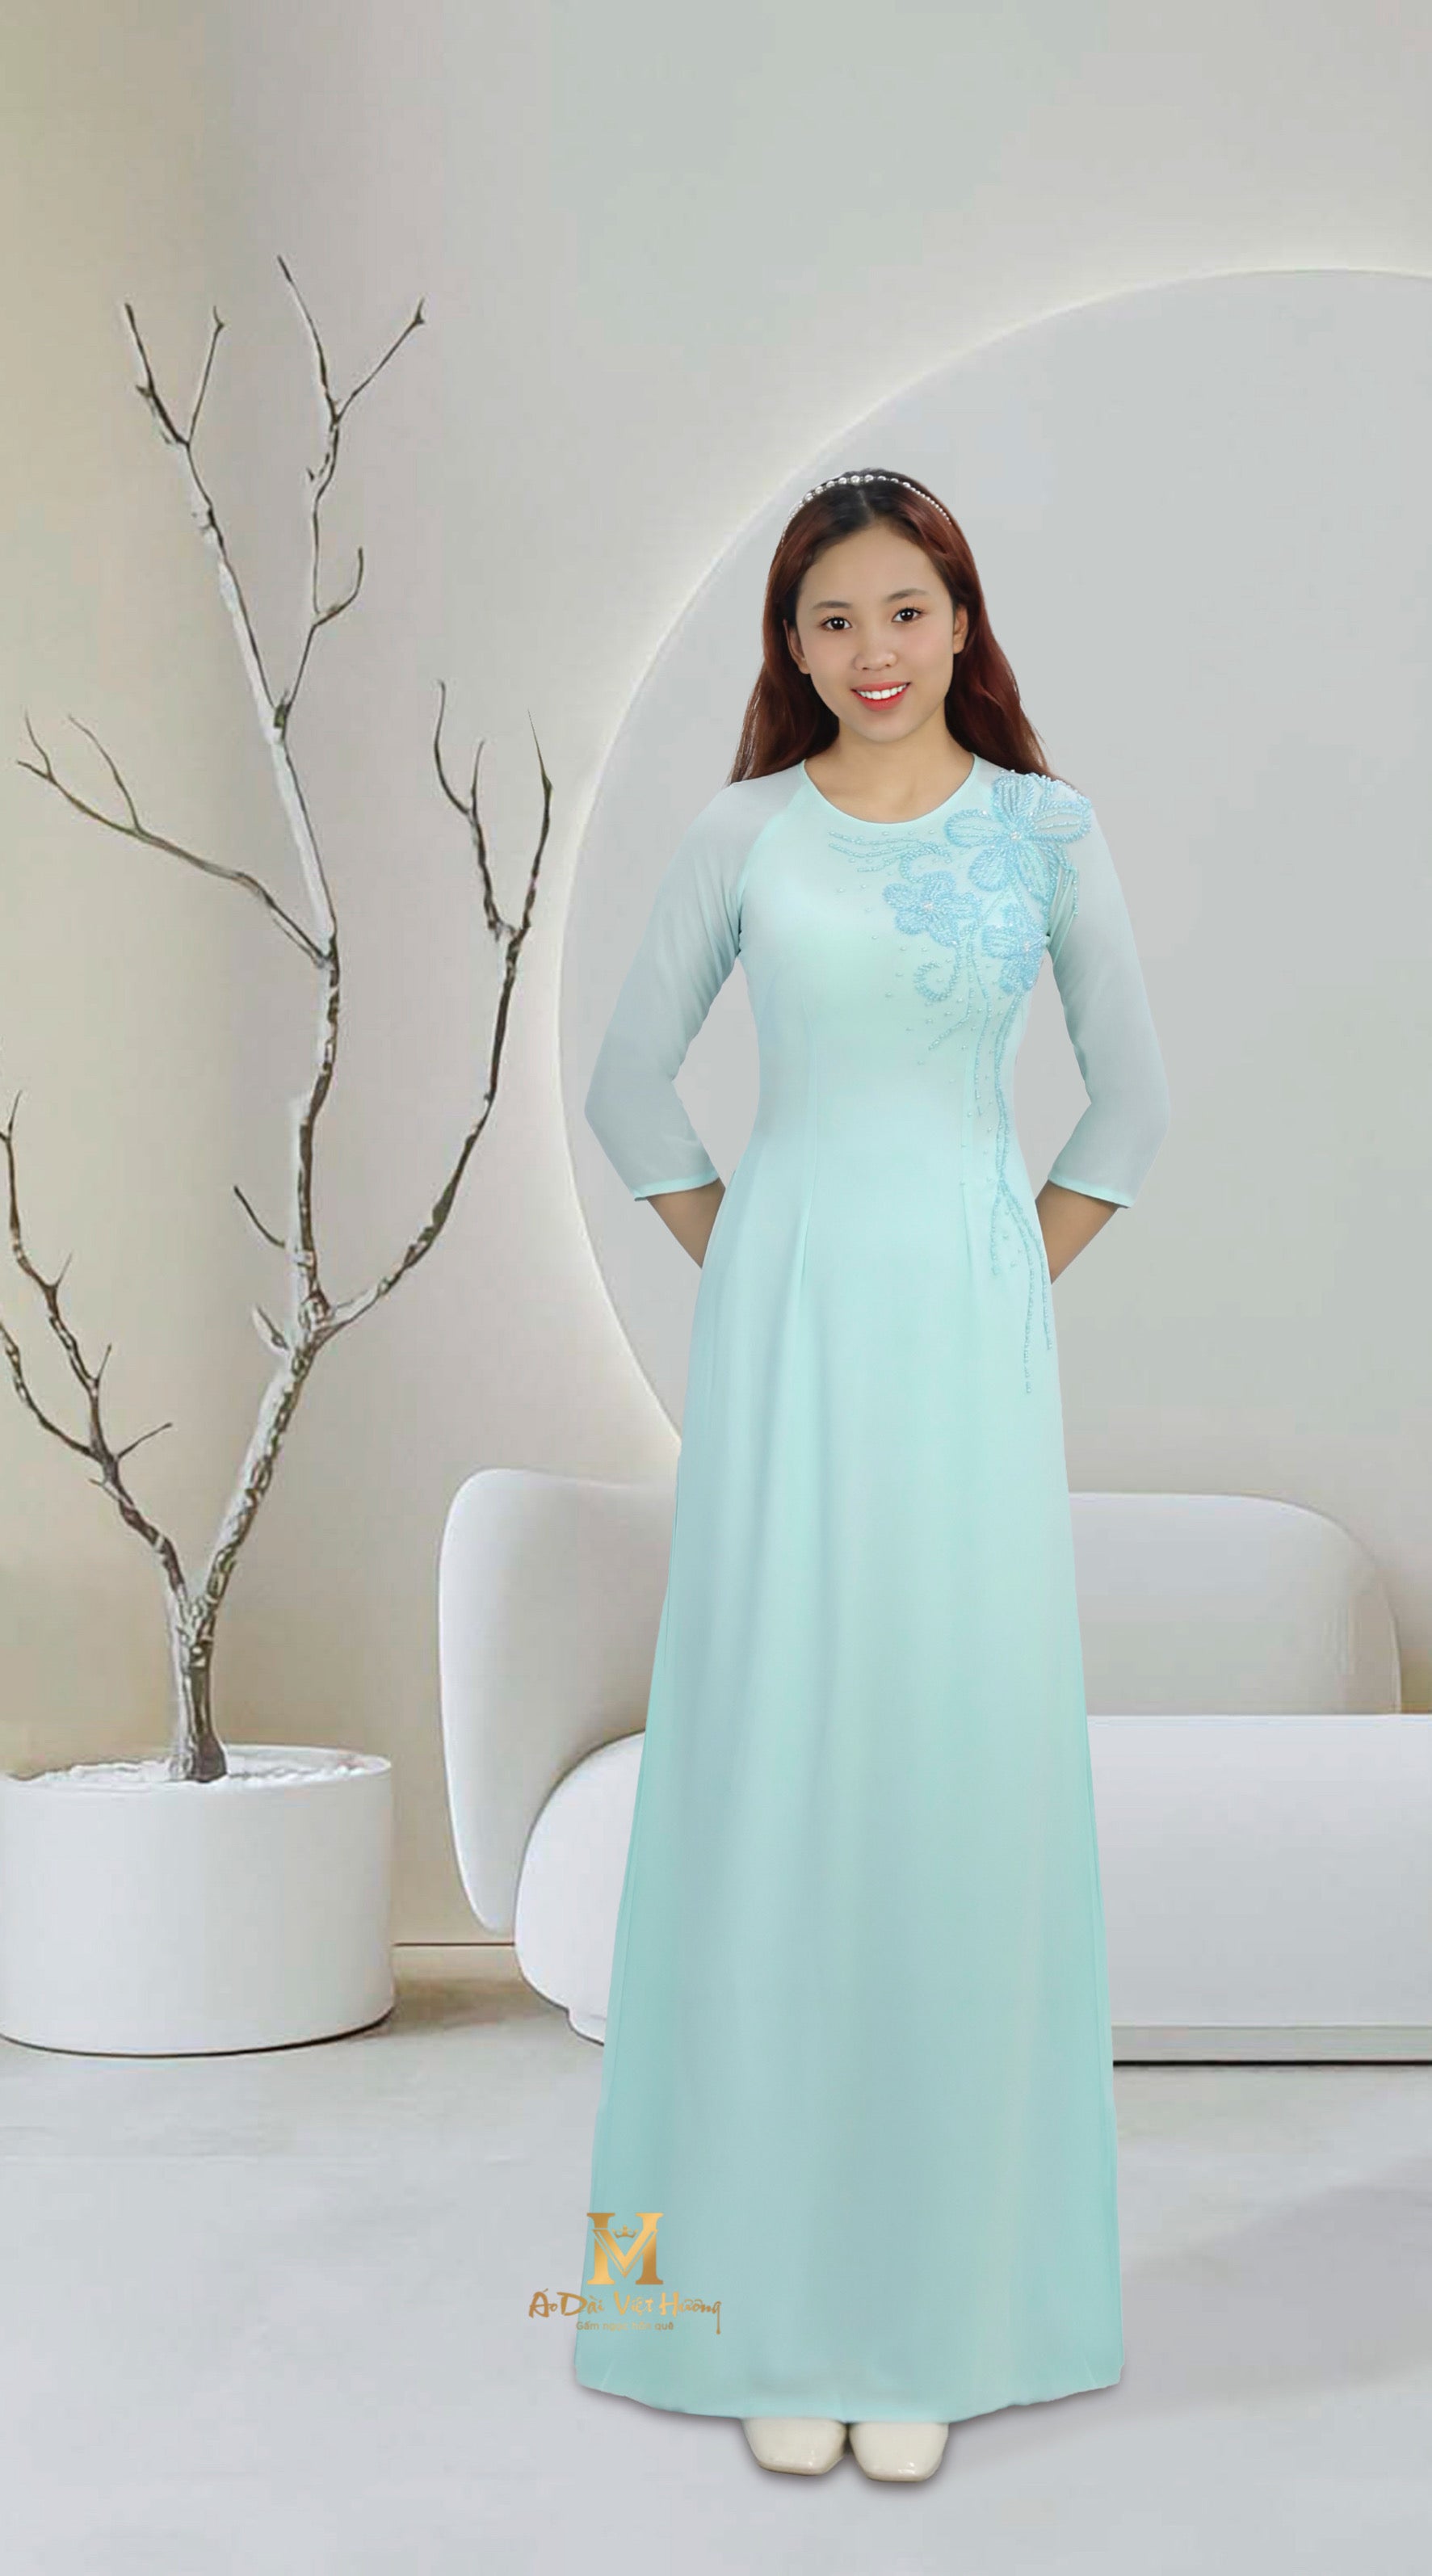 What was traditional Vietnamese clothing like before the ao dai